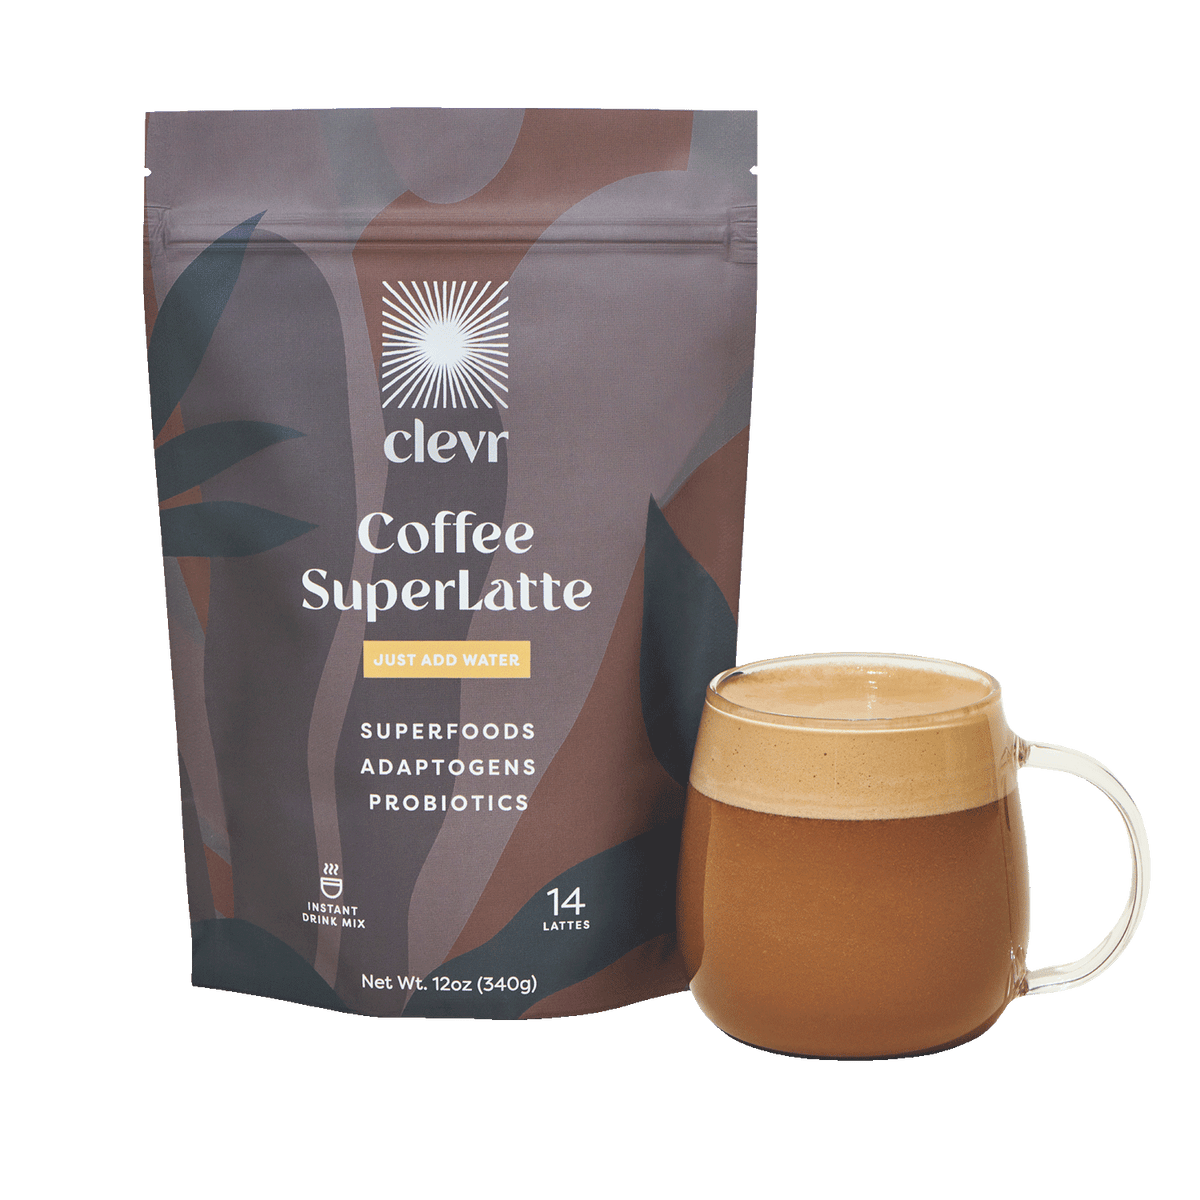 Coffee SuperLatte by Clevr